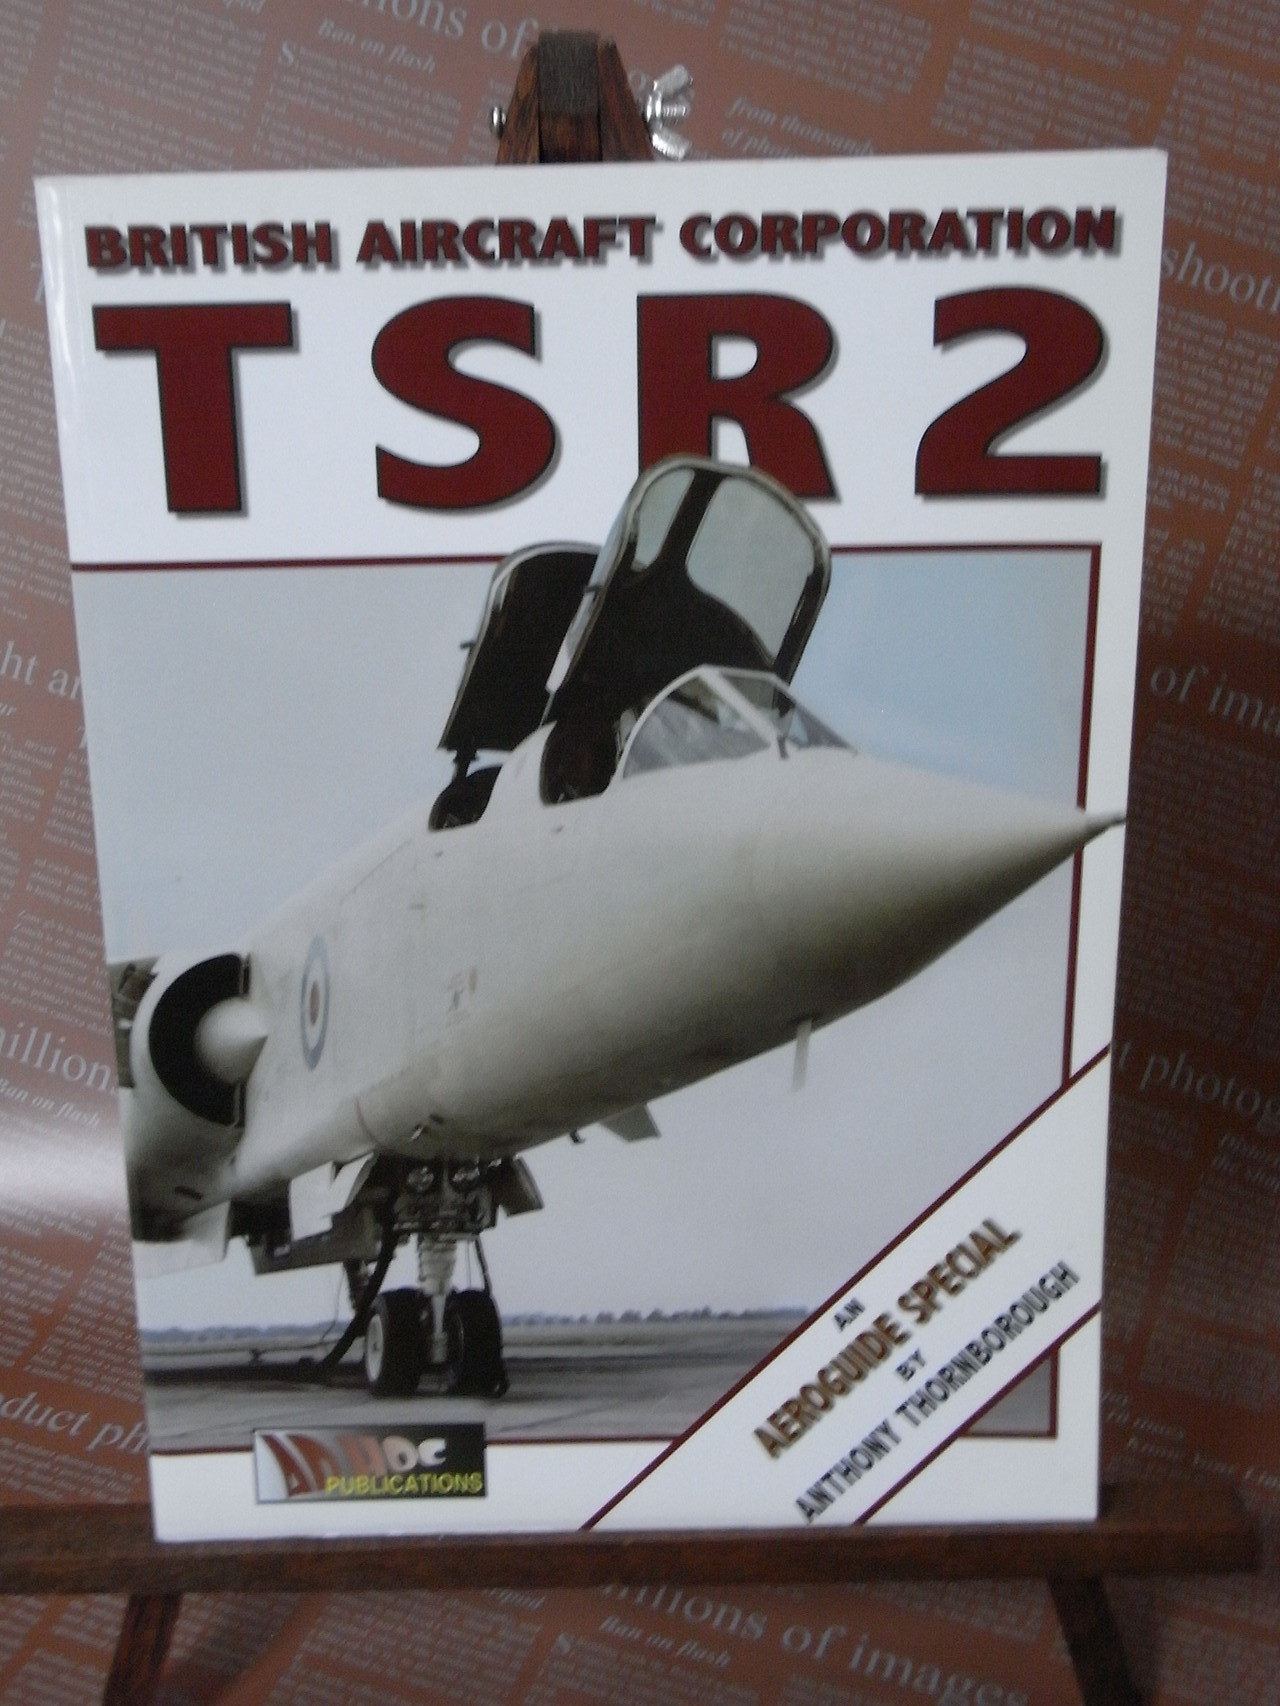 AEROGUIDE Special BAC TSR2  By Anthony Thornborough